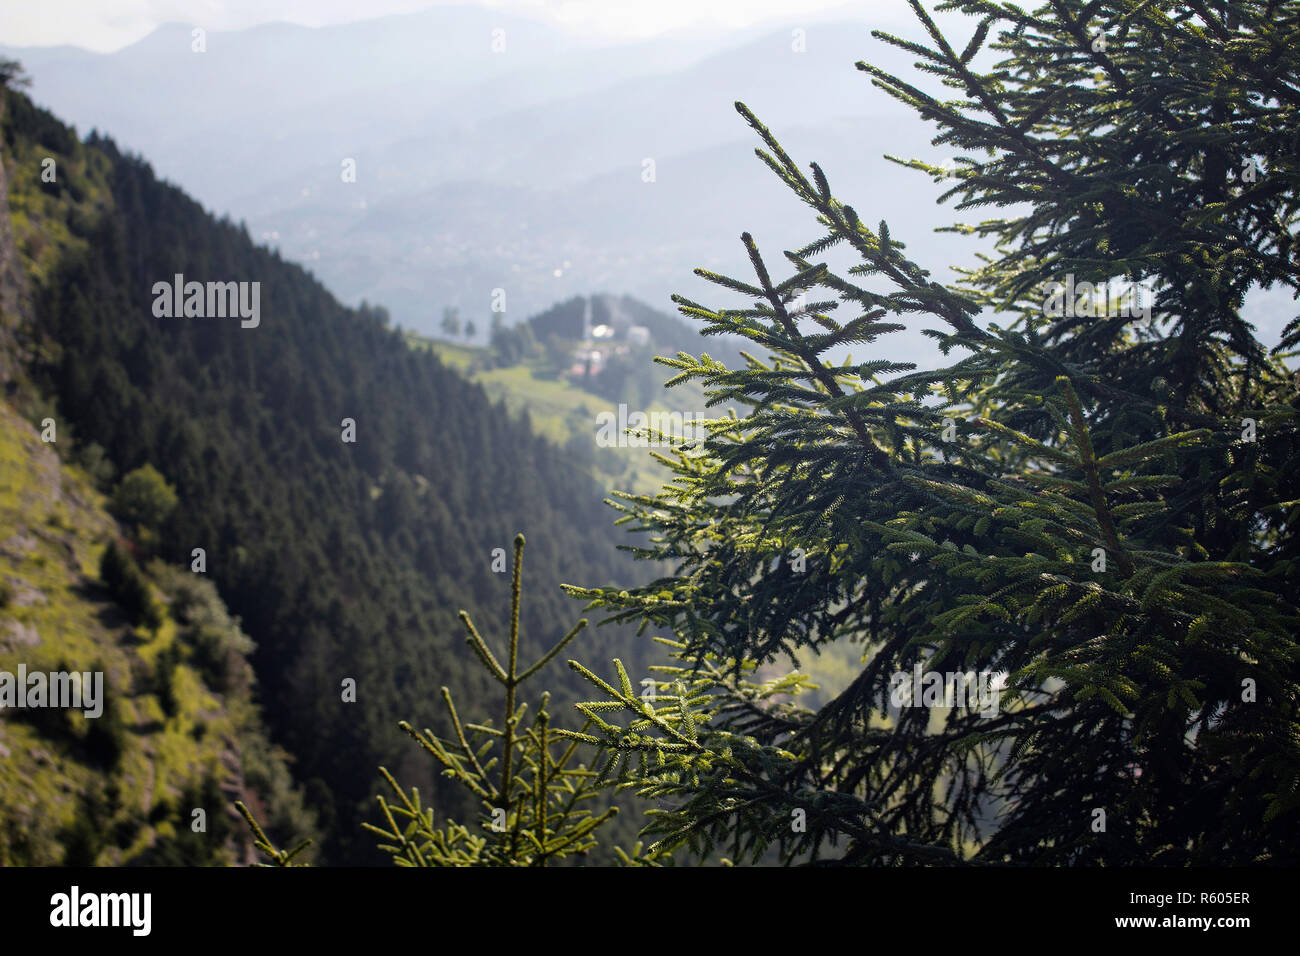 View of high plateau village, mountains and forest creating beautiful nature scene. The image is captured in Trabzon/Rize area of Black Sea region loc Stock Photo